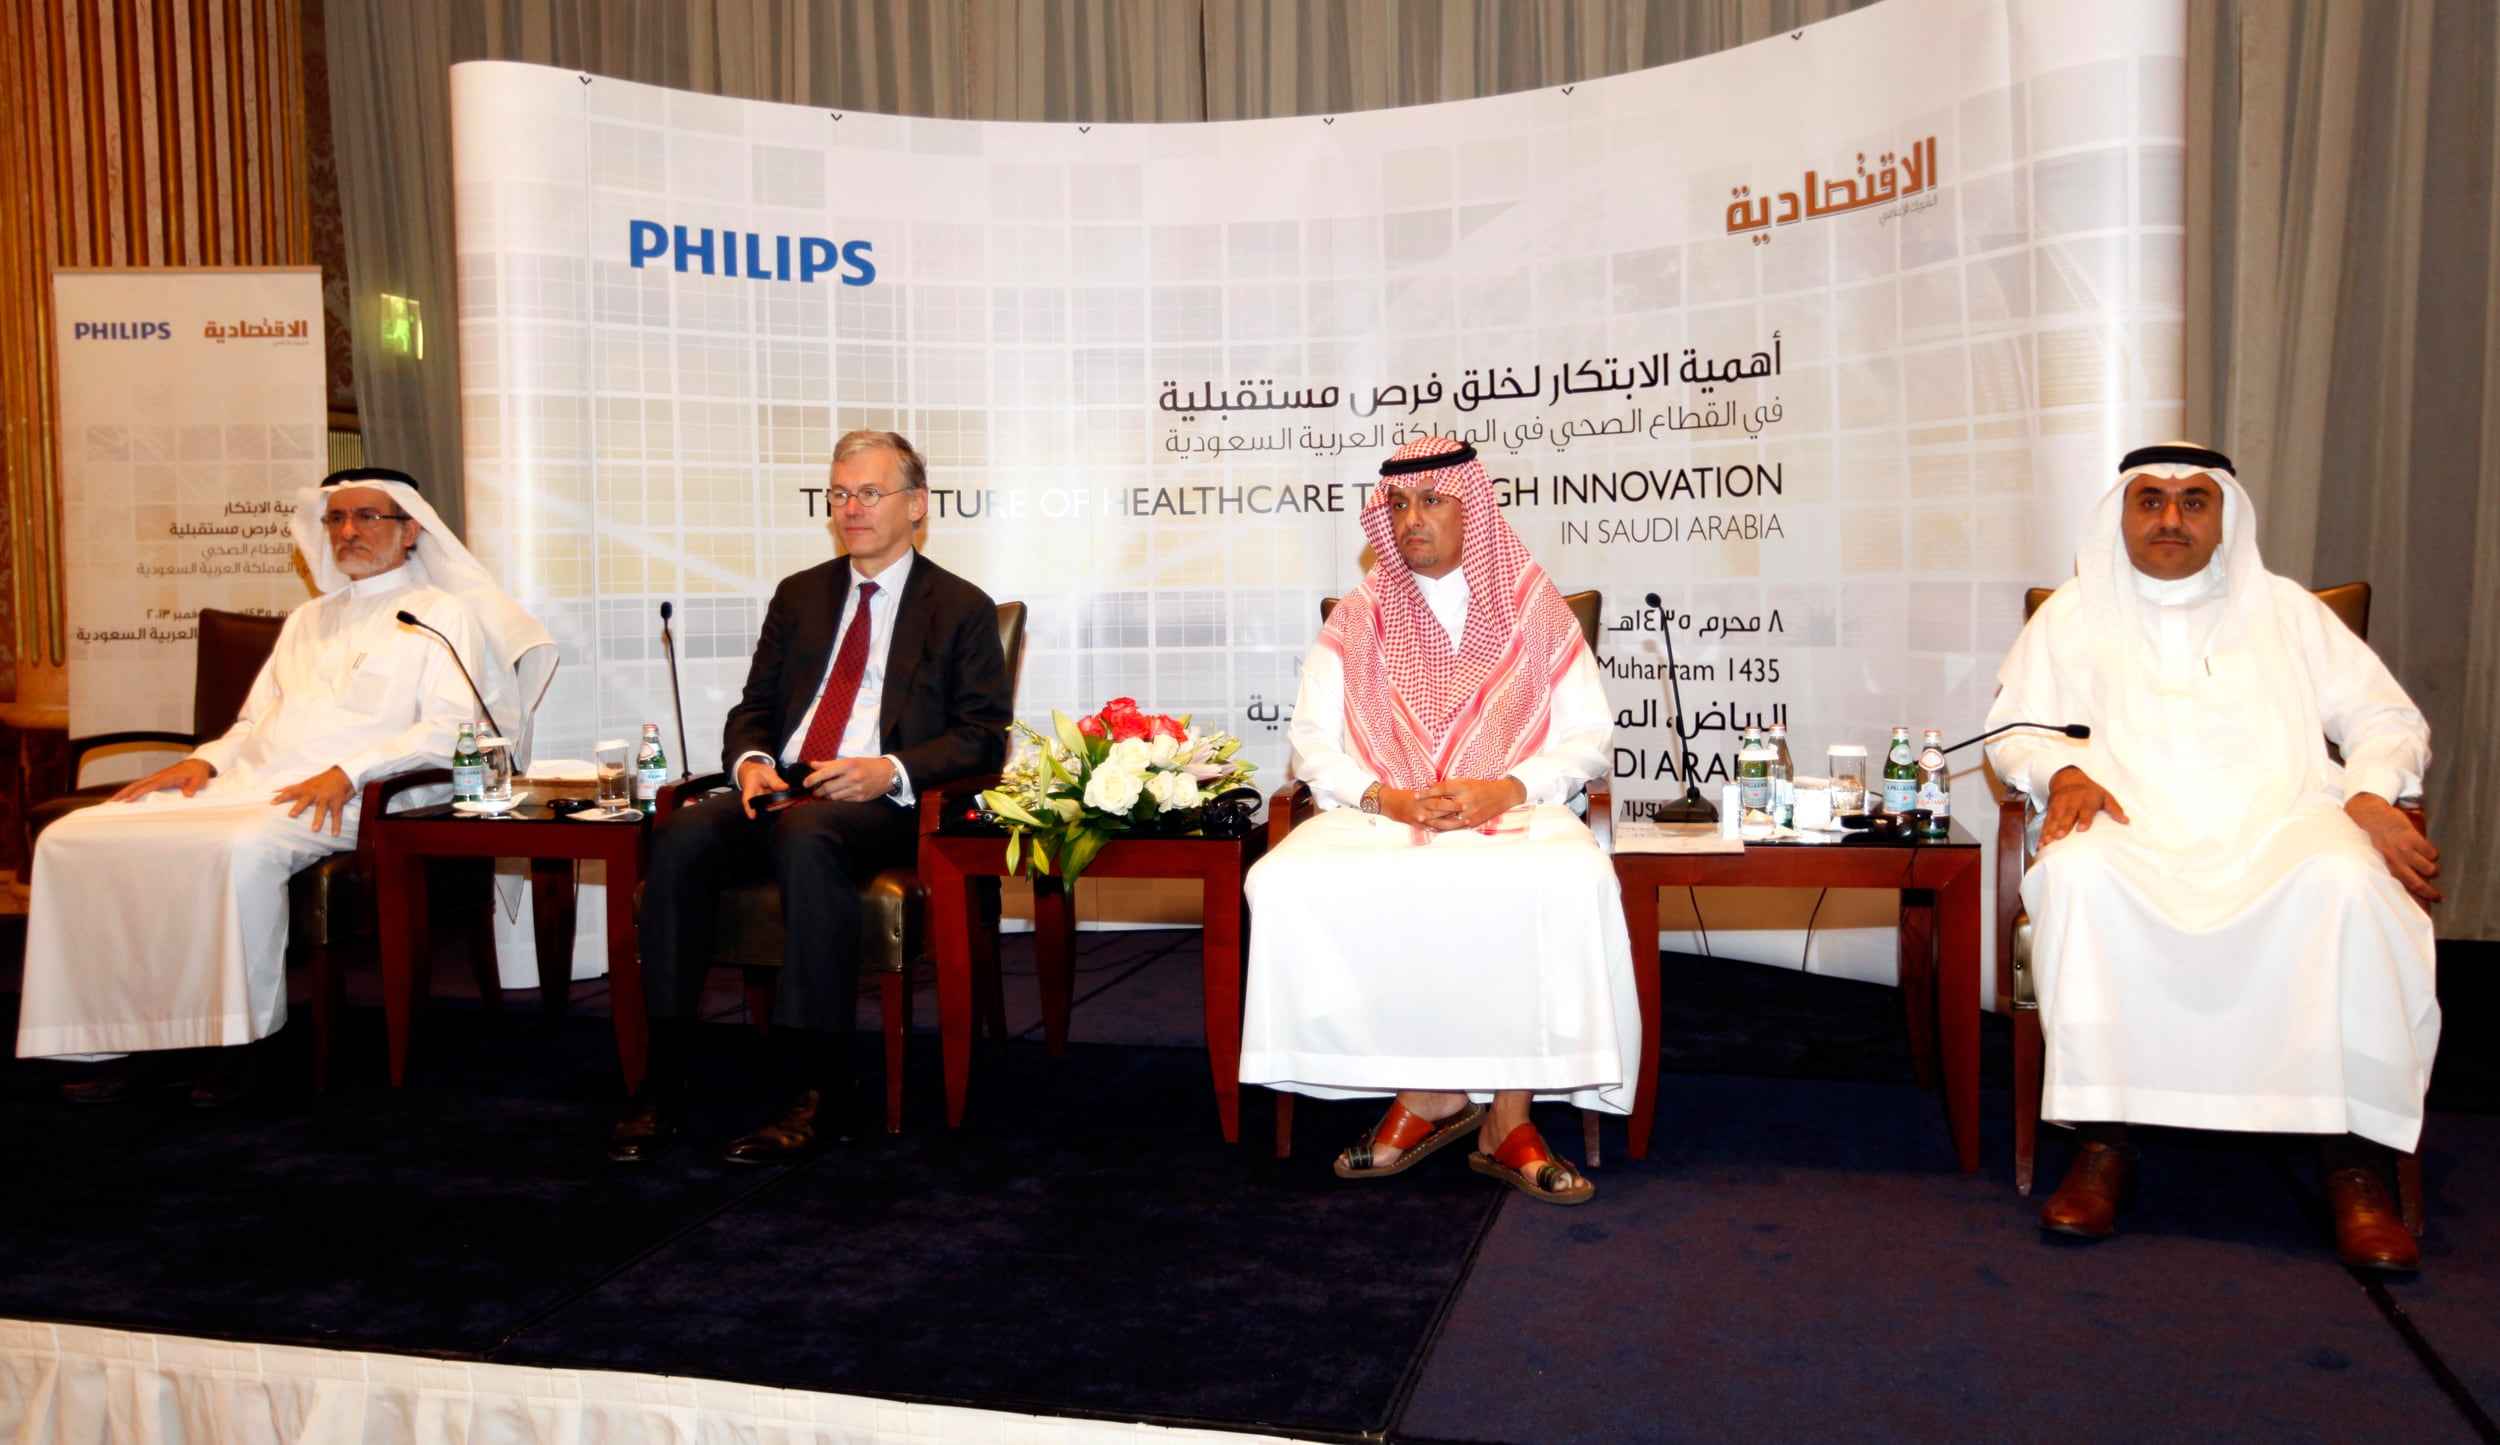 Philips has commissioned a new research report on how innovation can help shape the future delivery of healthcare in Saudi Arabia. The report compiled by the Economist Intelligence Unit (EIU) will gather evidence through in-depth interviews with the local and international thought-leaders that are creating the Kingdom’s healthcare plans for the future. 